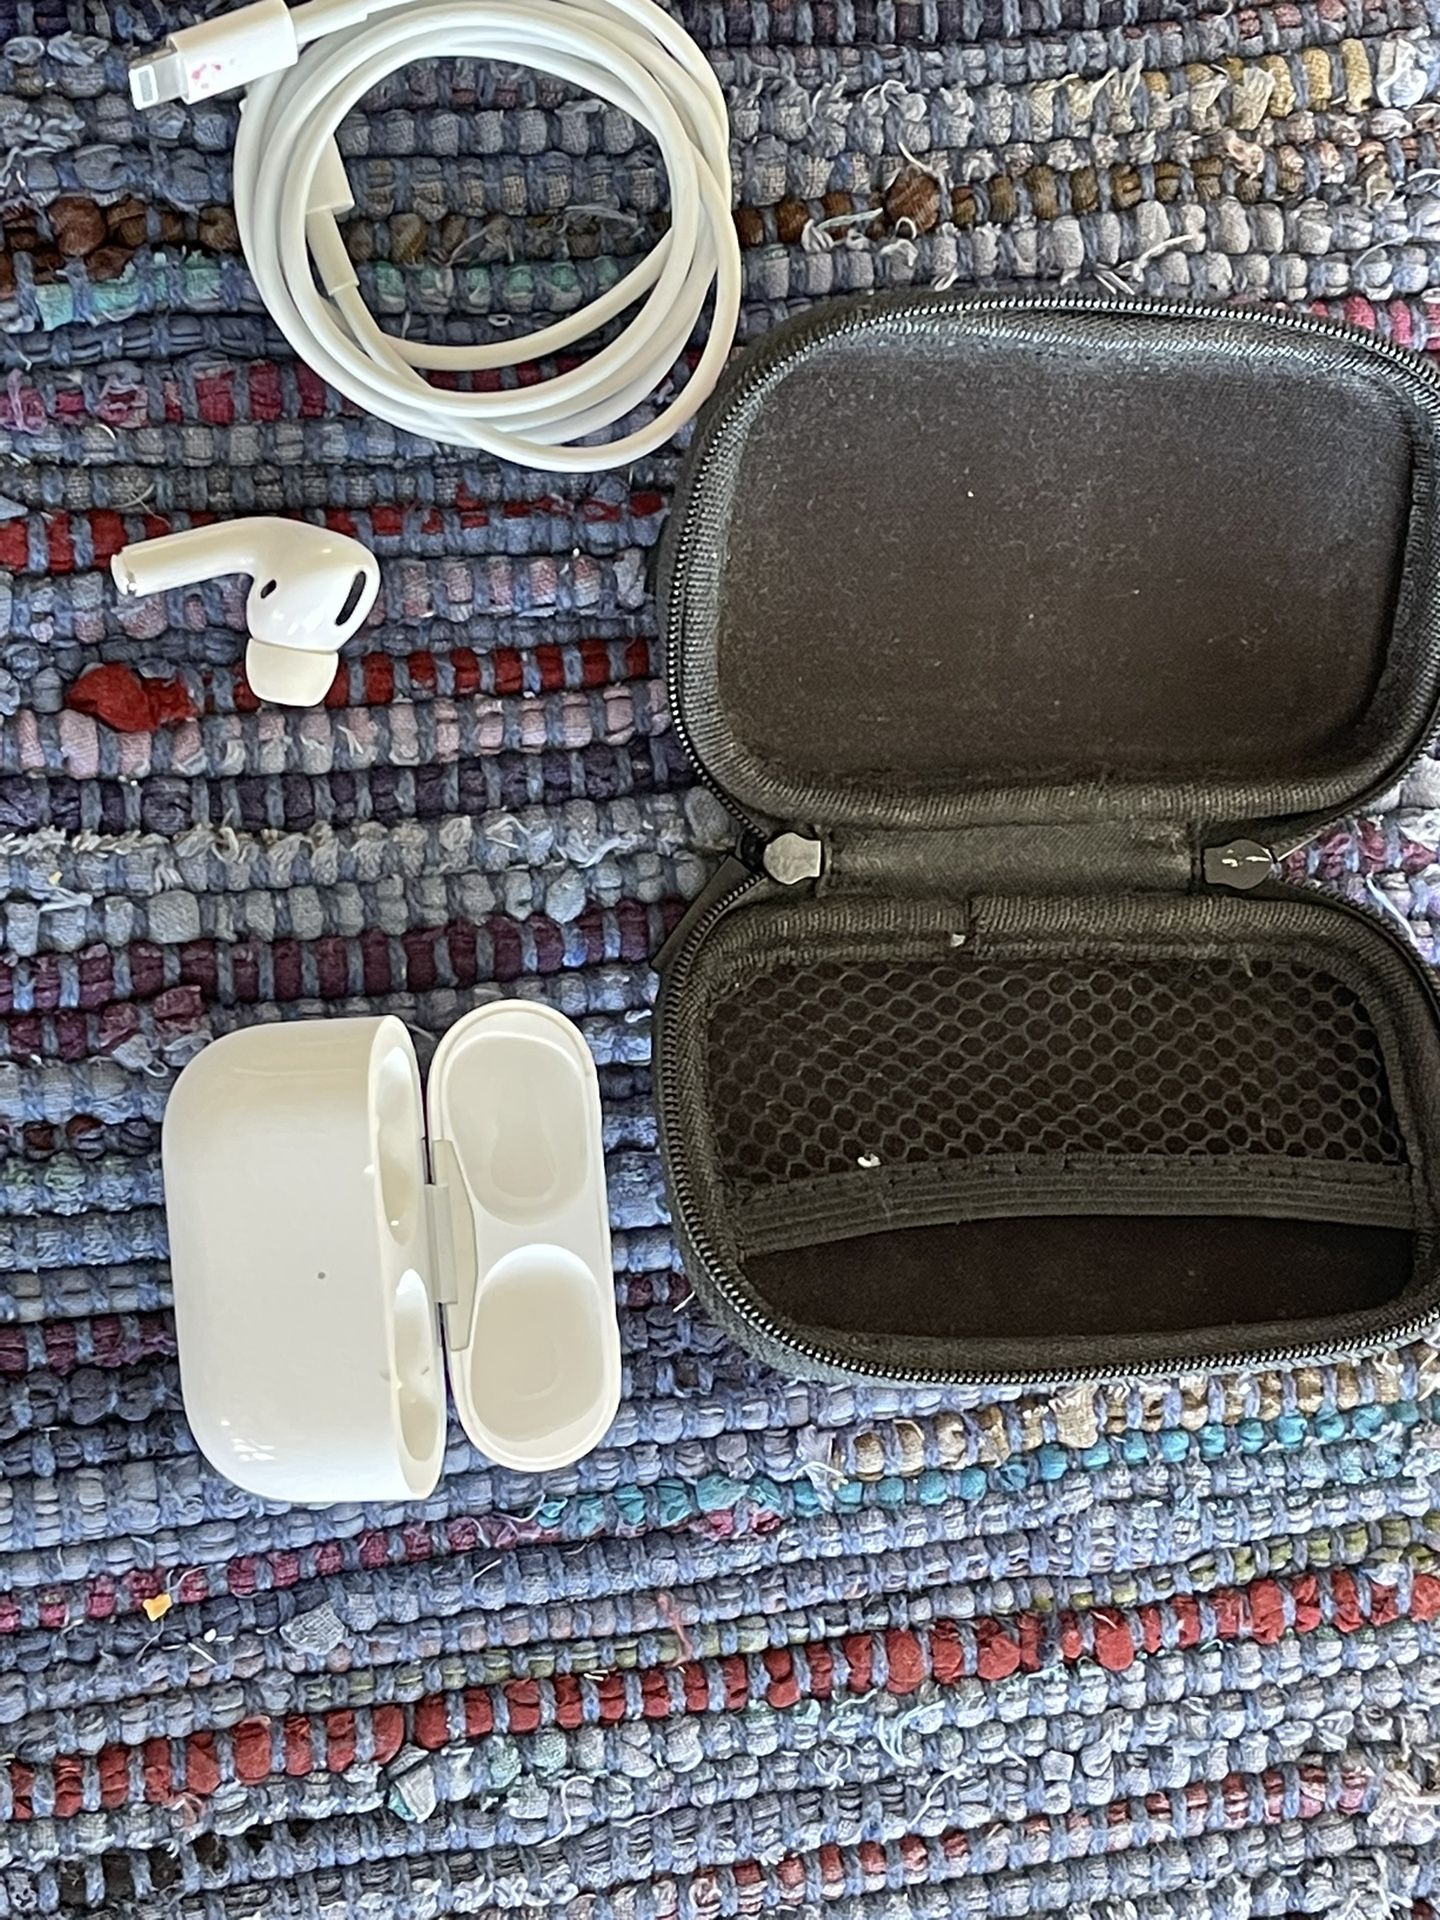 APPLE AIRPOD PRO - MISSING RIGHT! INCLUDES A LOT!